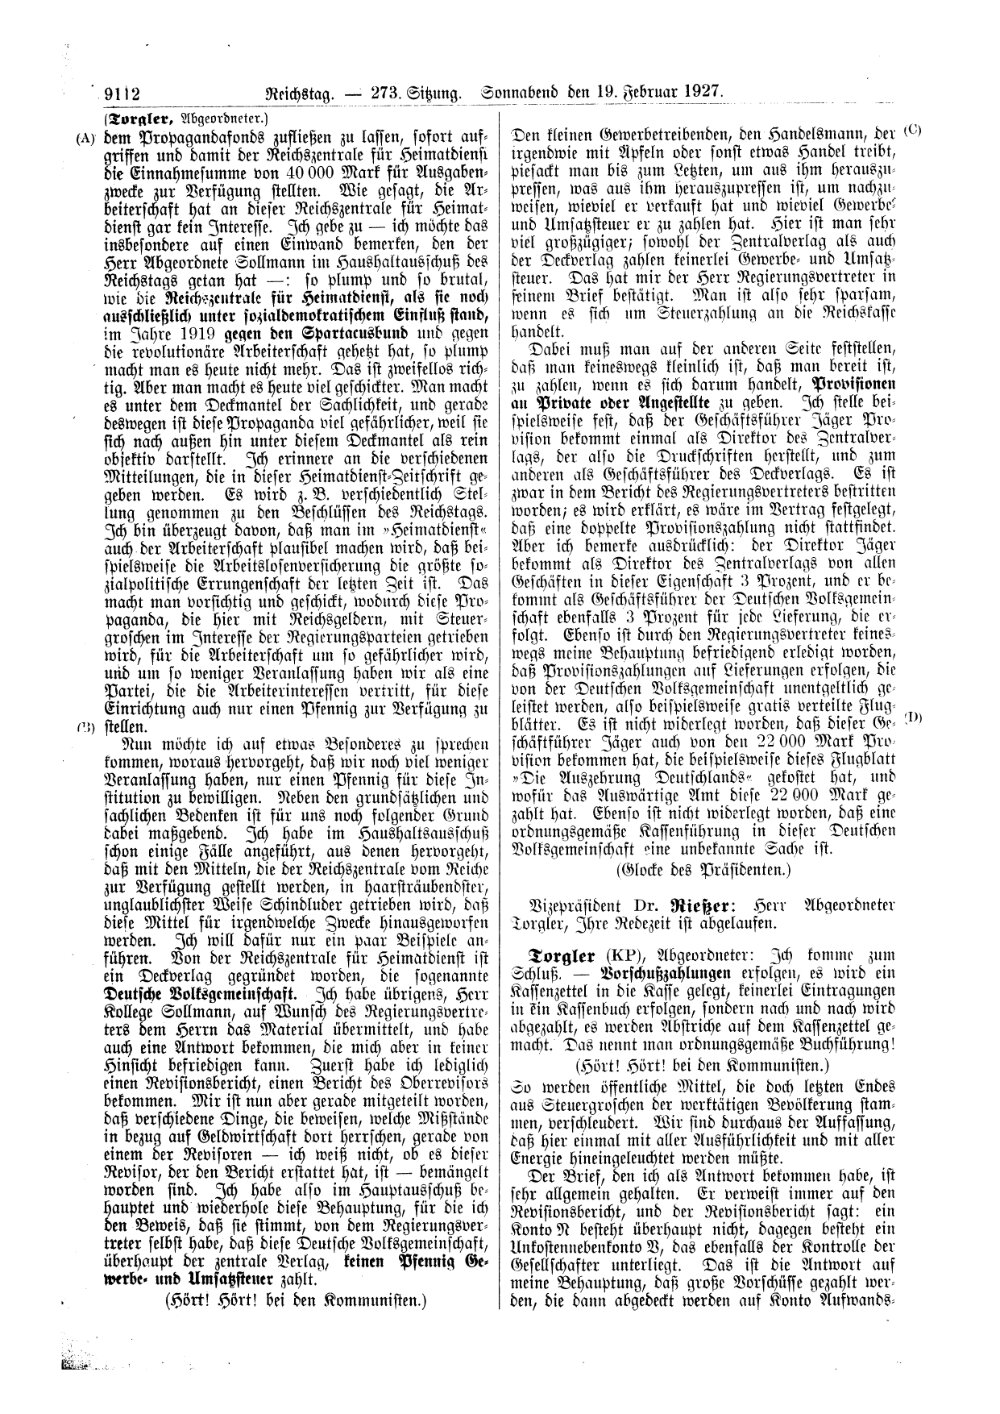 Scan of page 9112